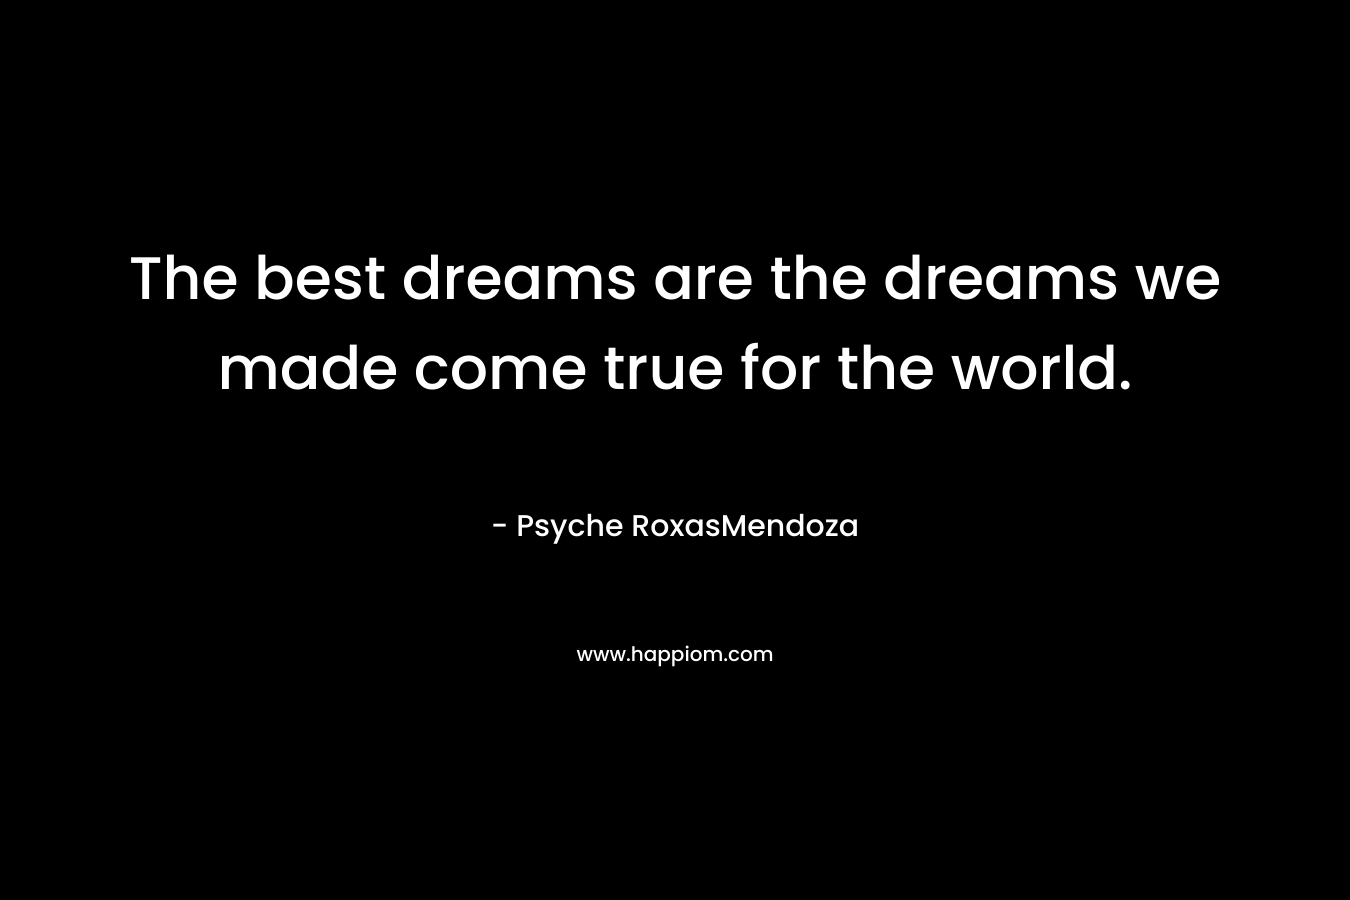 The best dreams are the dreams we made come true for the world.